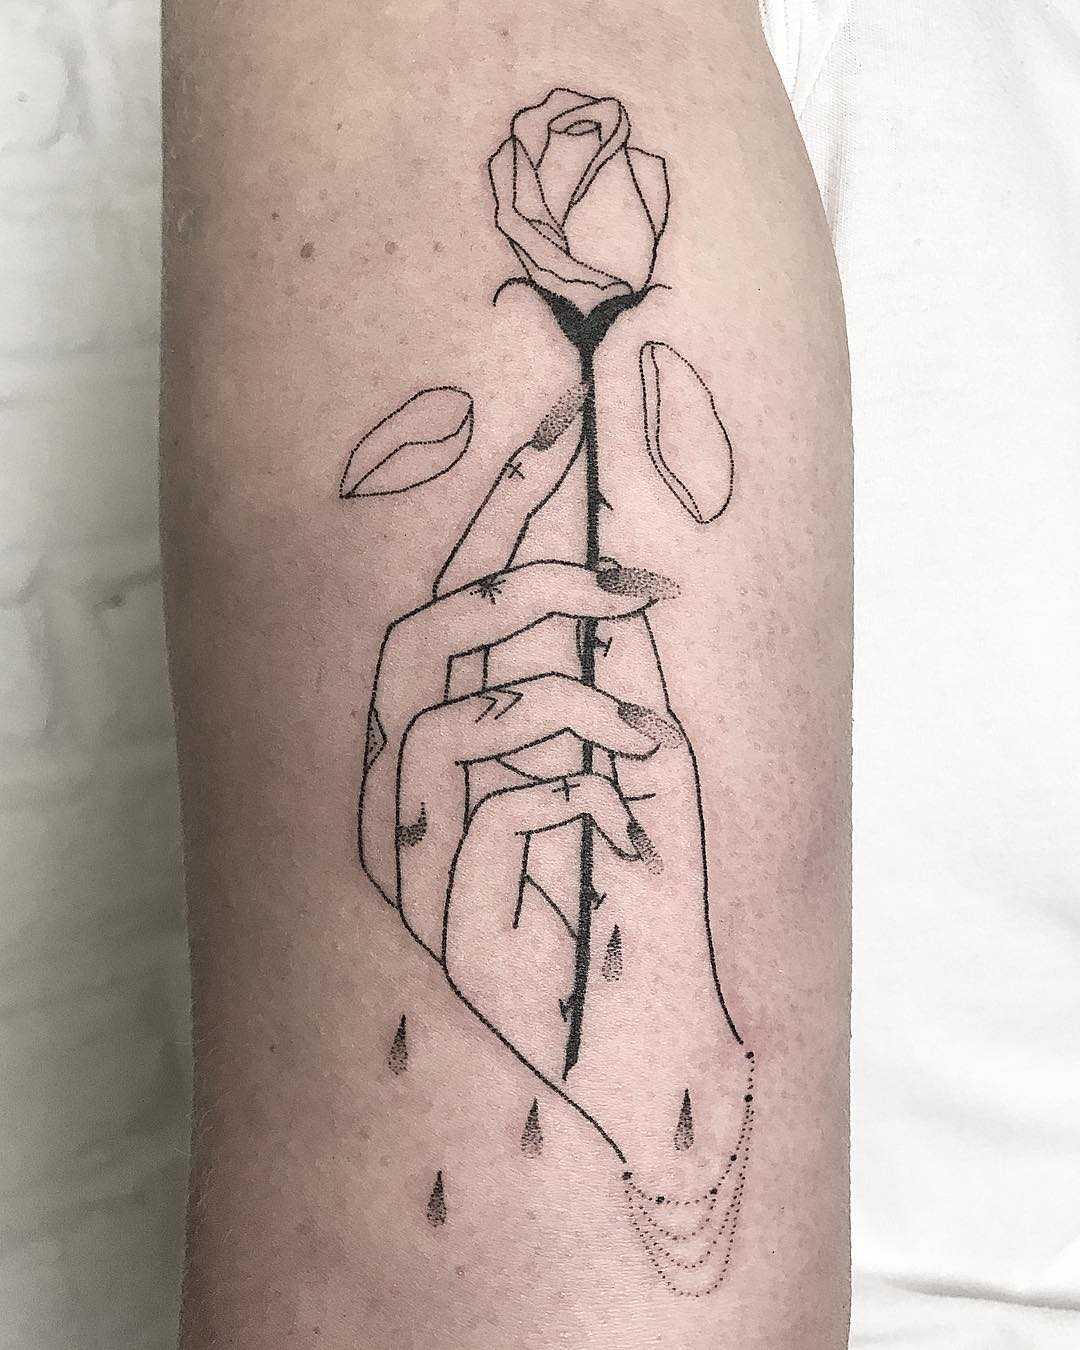 Hand with a rose by Femme Fatale Tattoo